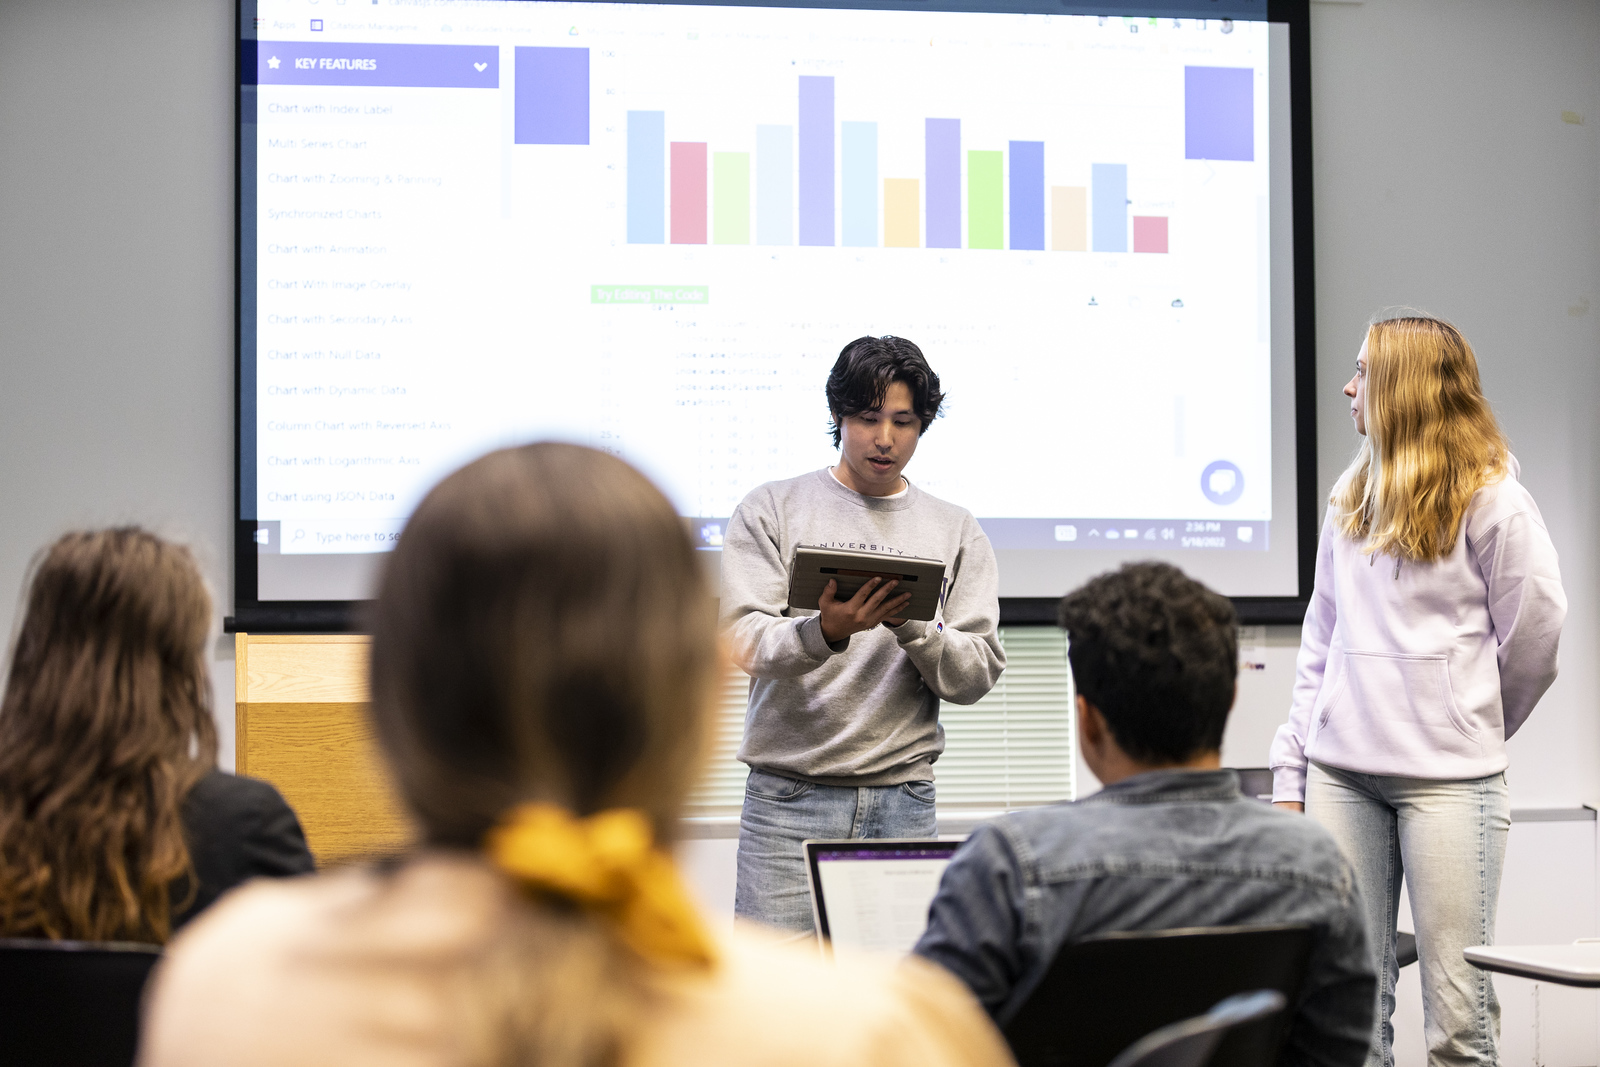 Students present data visualizations to an audience of peers